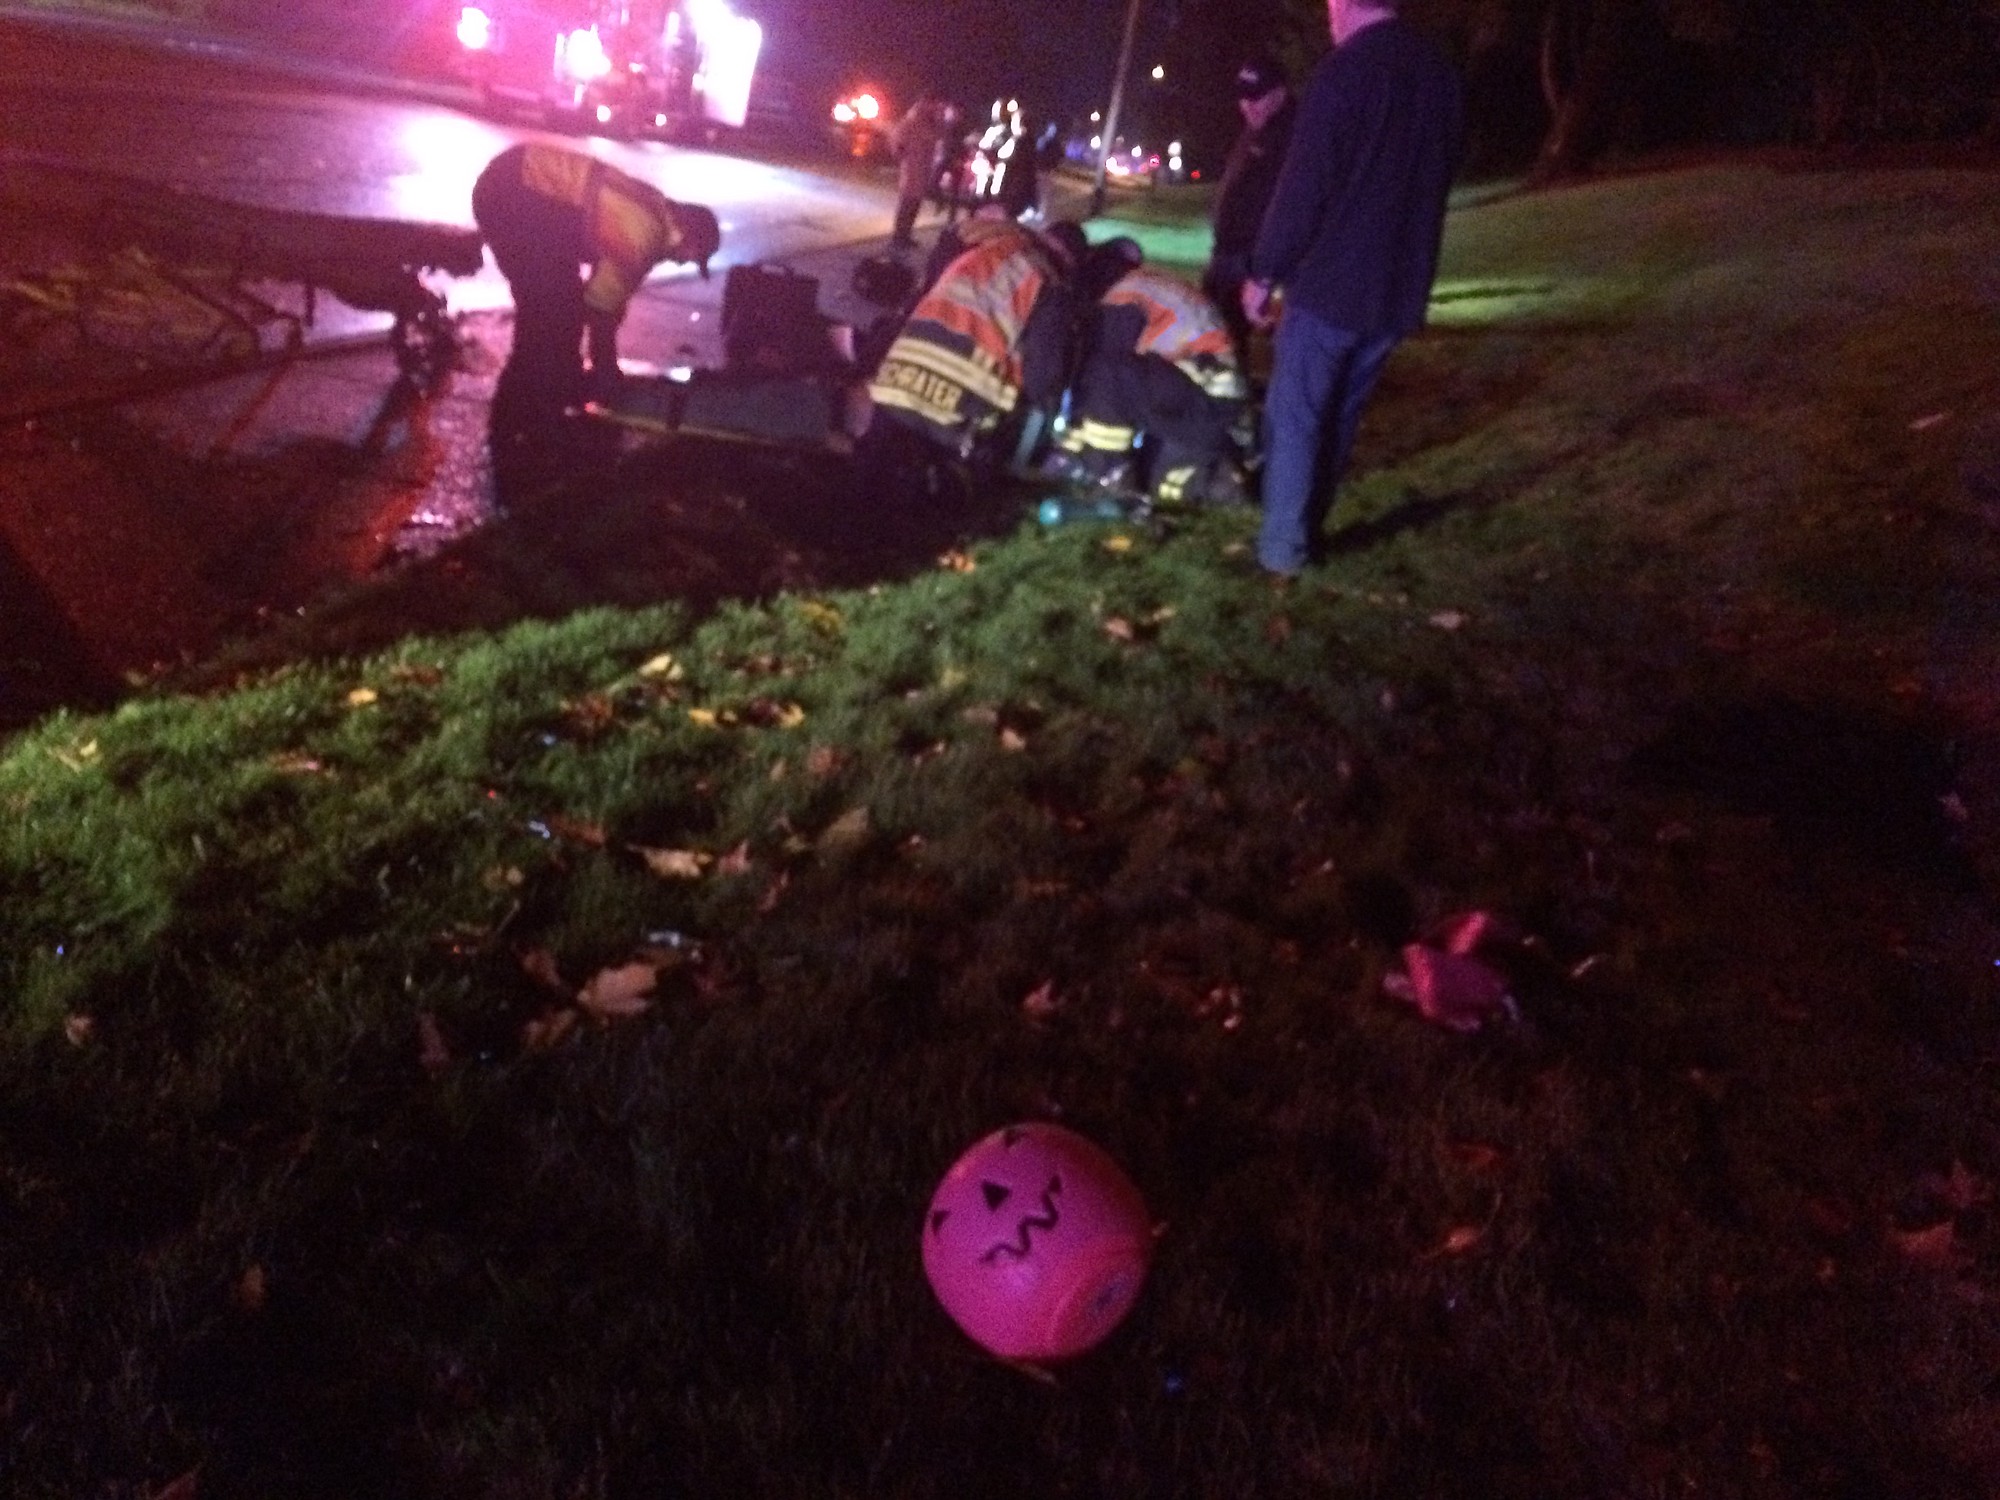 Emergency crews treat pedestrians who were hit by a car Friday night on a sidewalk on Northeast 112th Avenue in Vancouver.